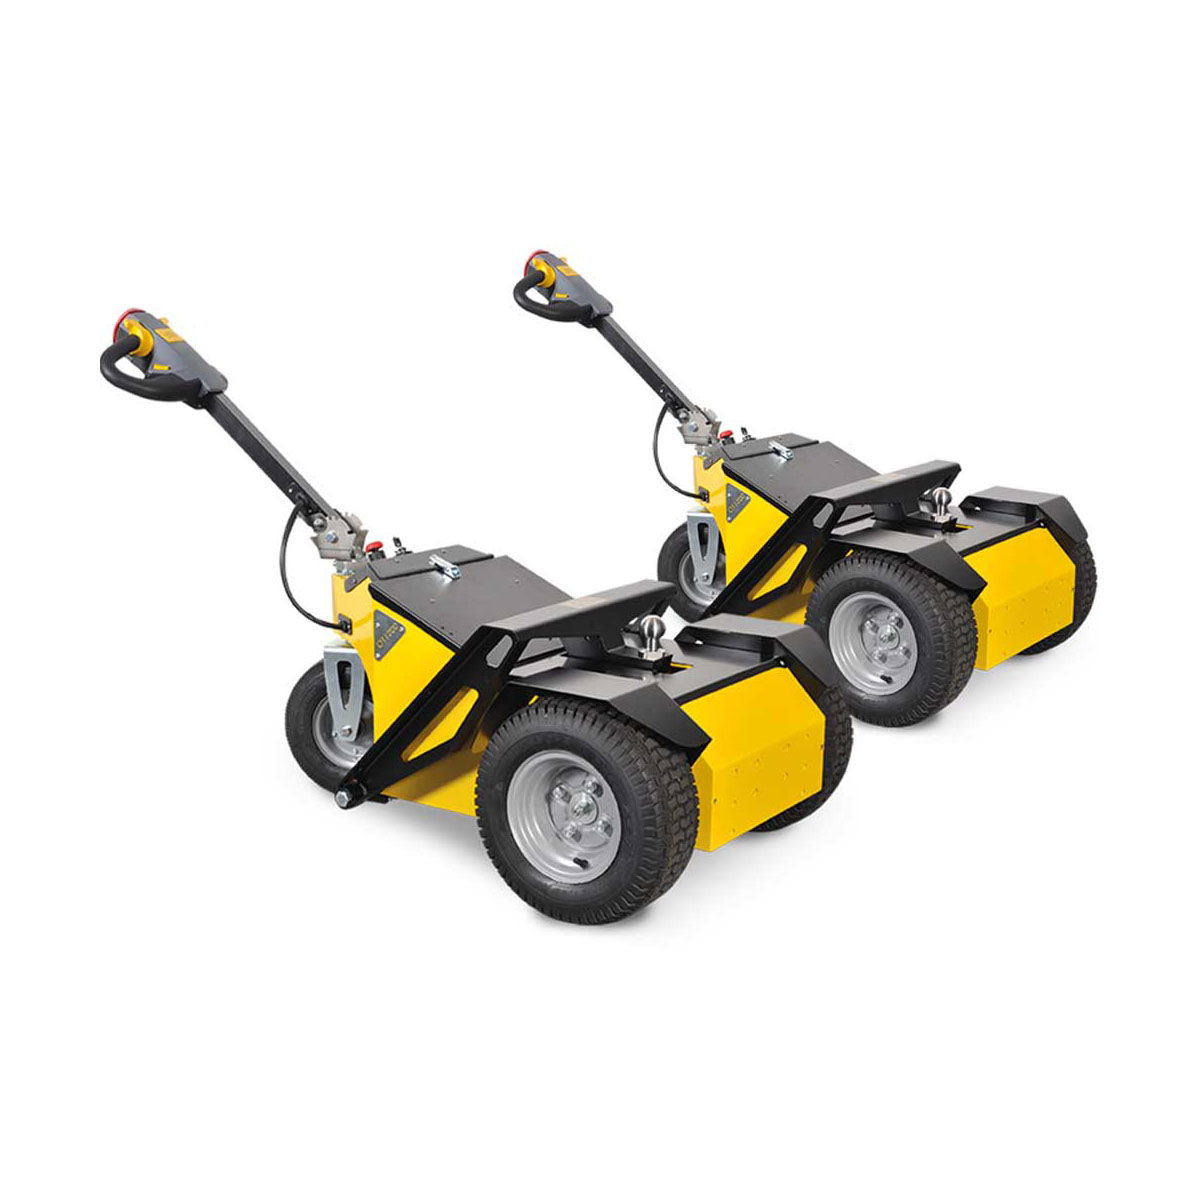 Buy Electric Tug - Tow Ball  in Electric Tugs from Alitrak available at Astrolift NZ